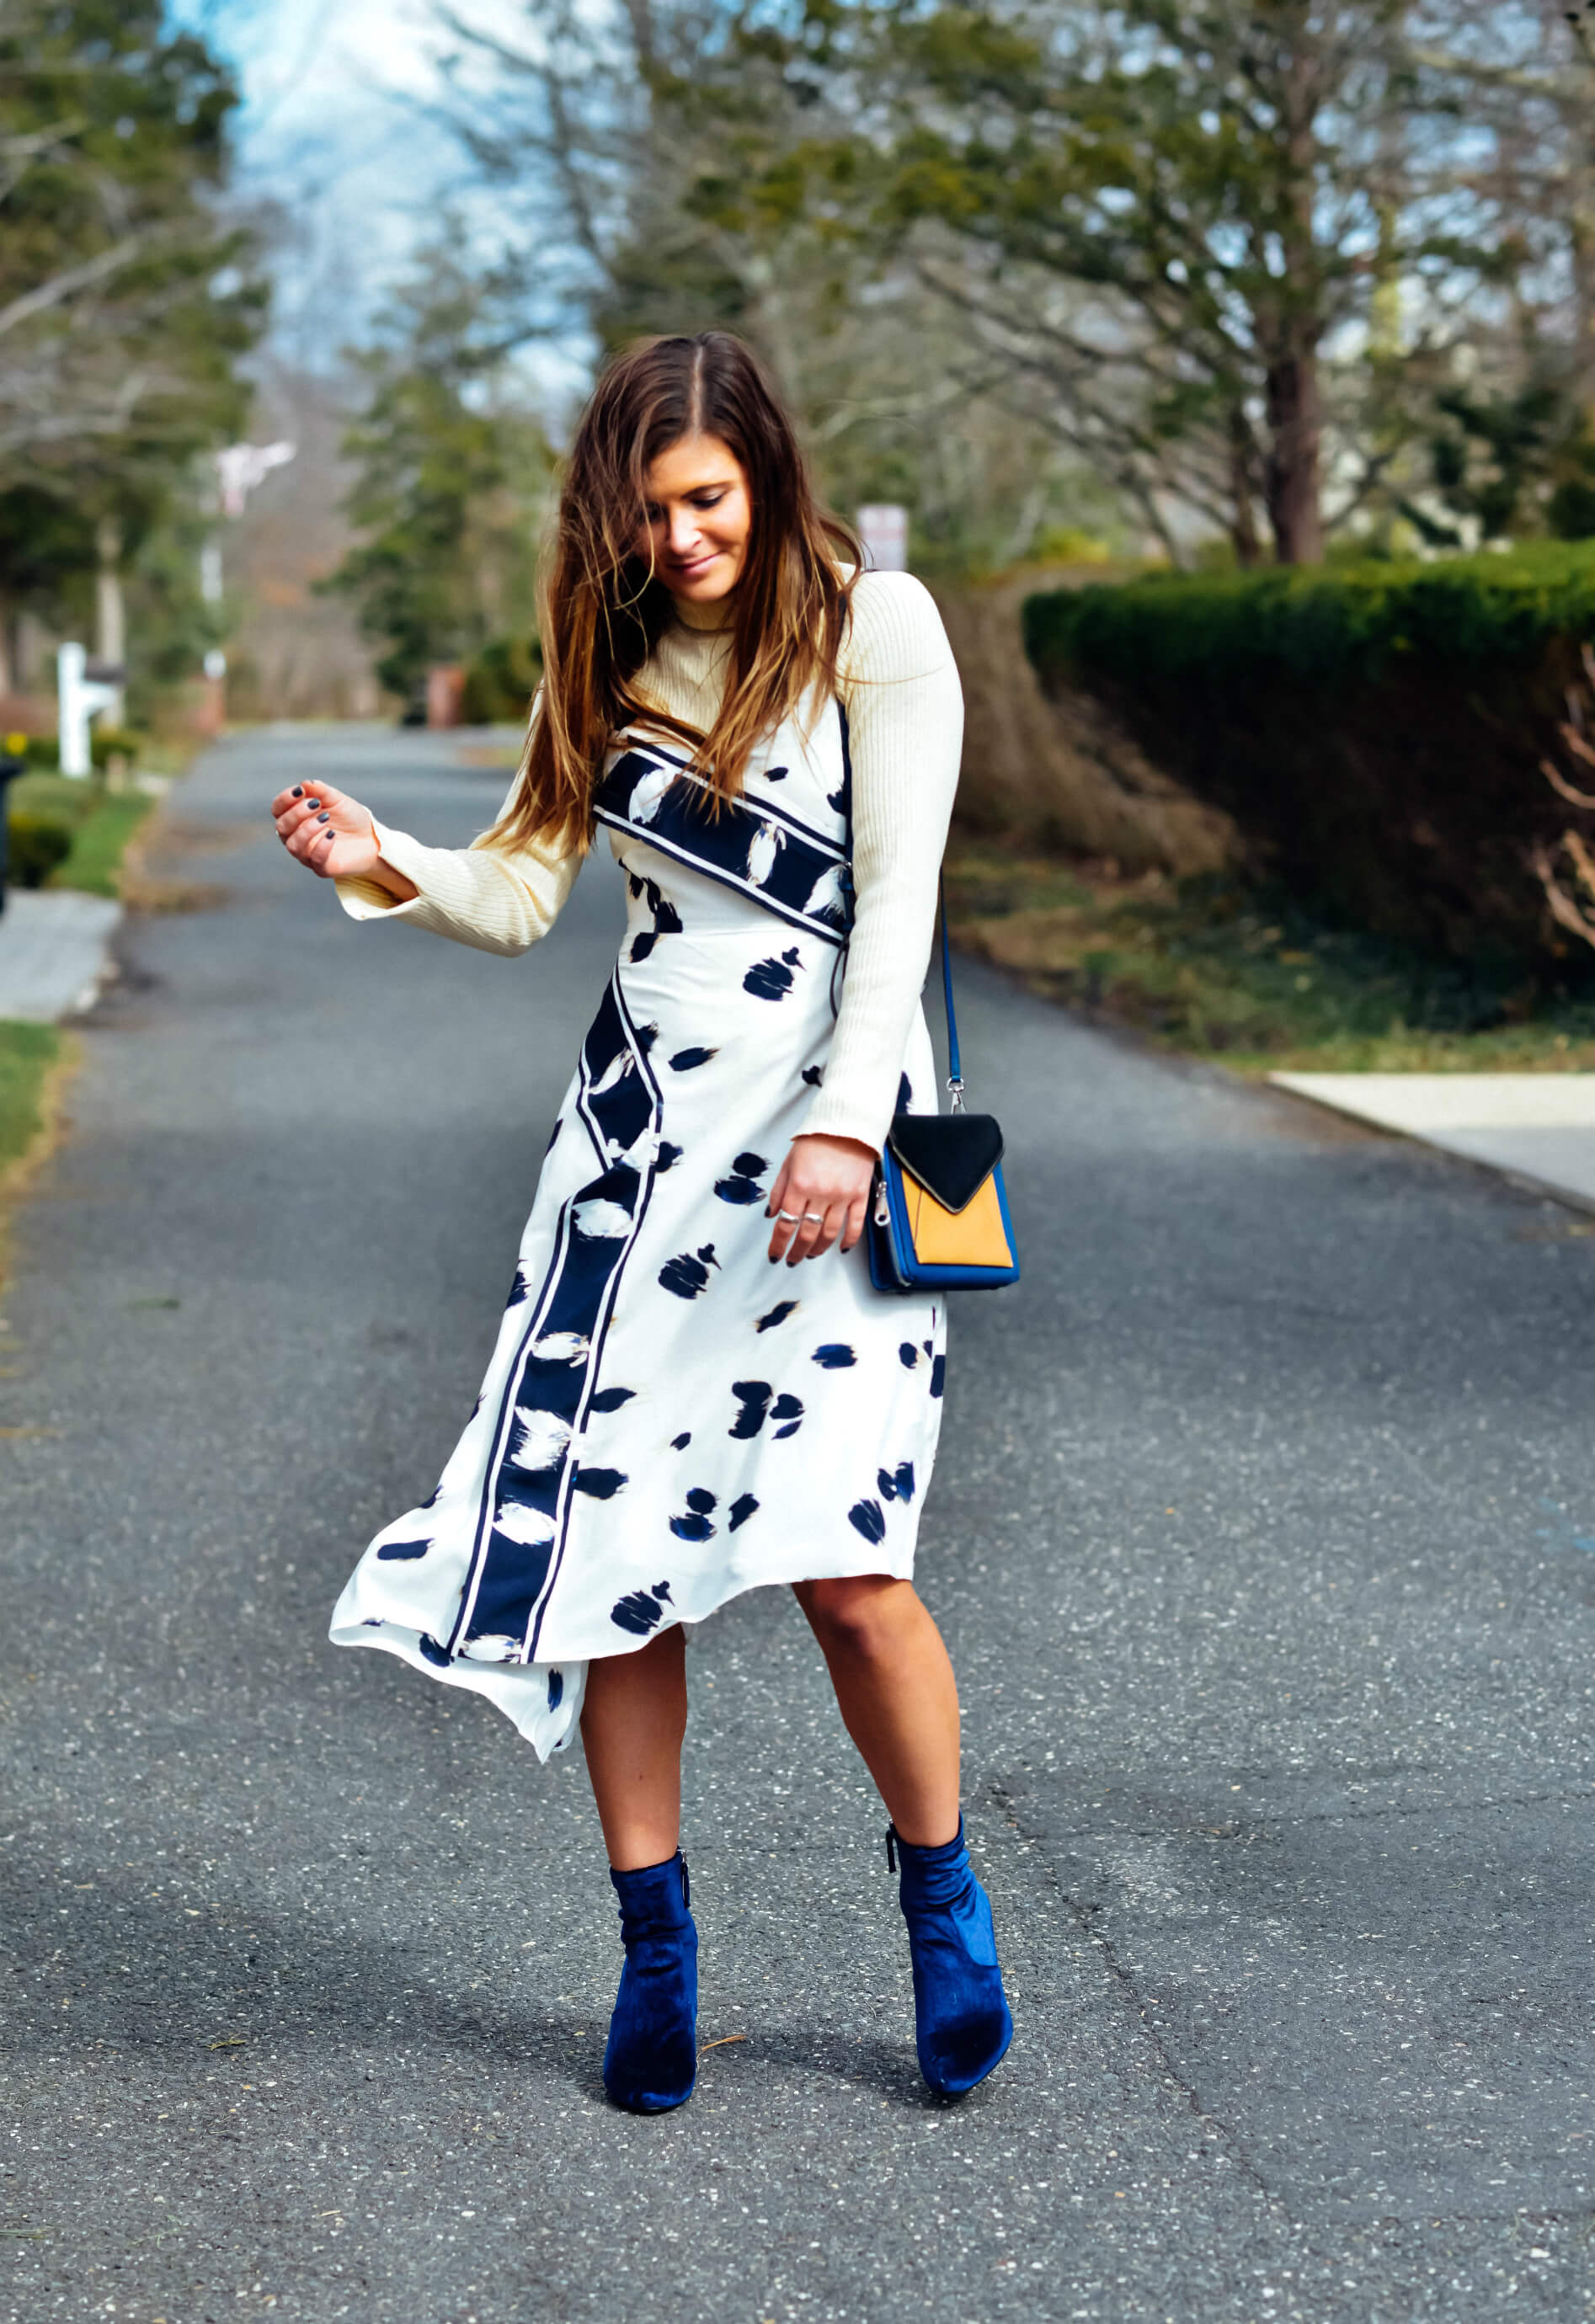 Banana Republic Dress, GANT Turtleneck, Rebecca Minkoff Bag, Spring Layers, Outfit Inspiration, Tilden of To Be Bright